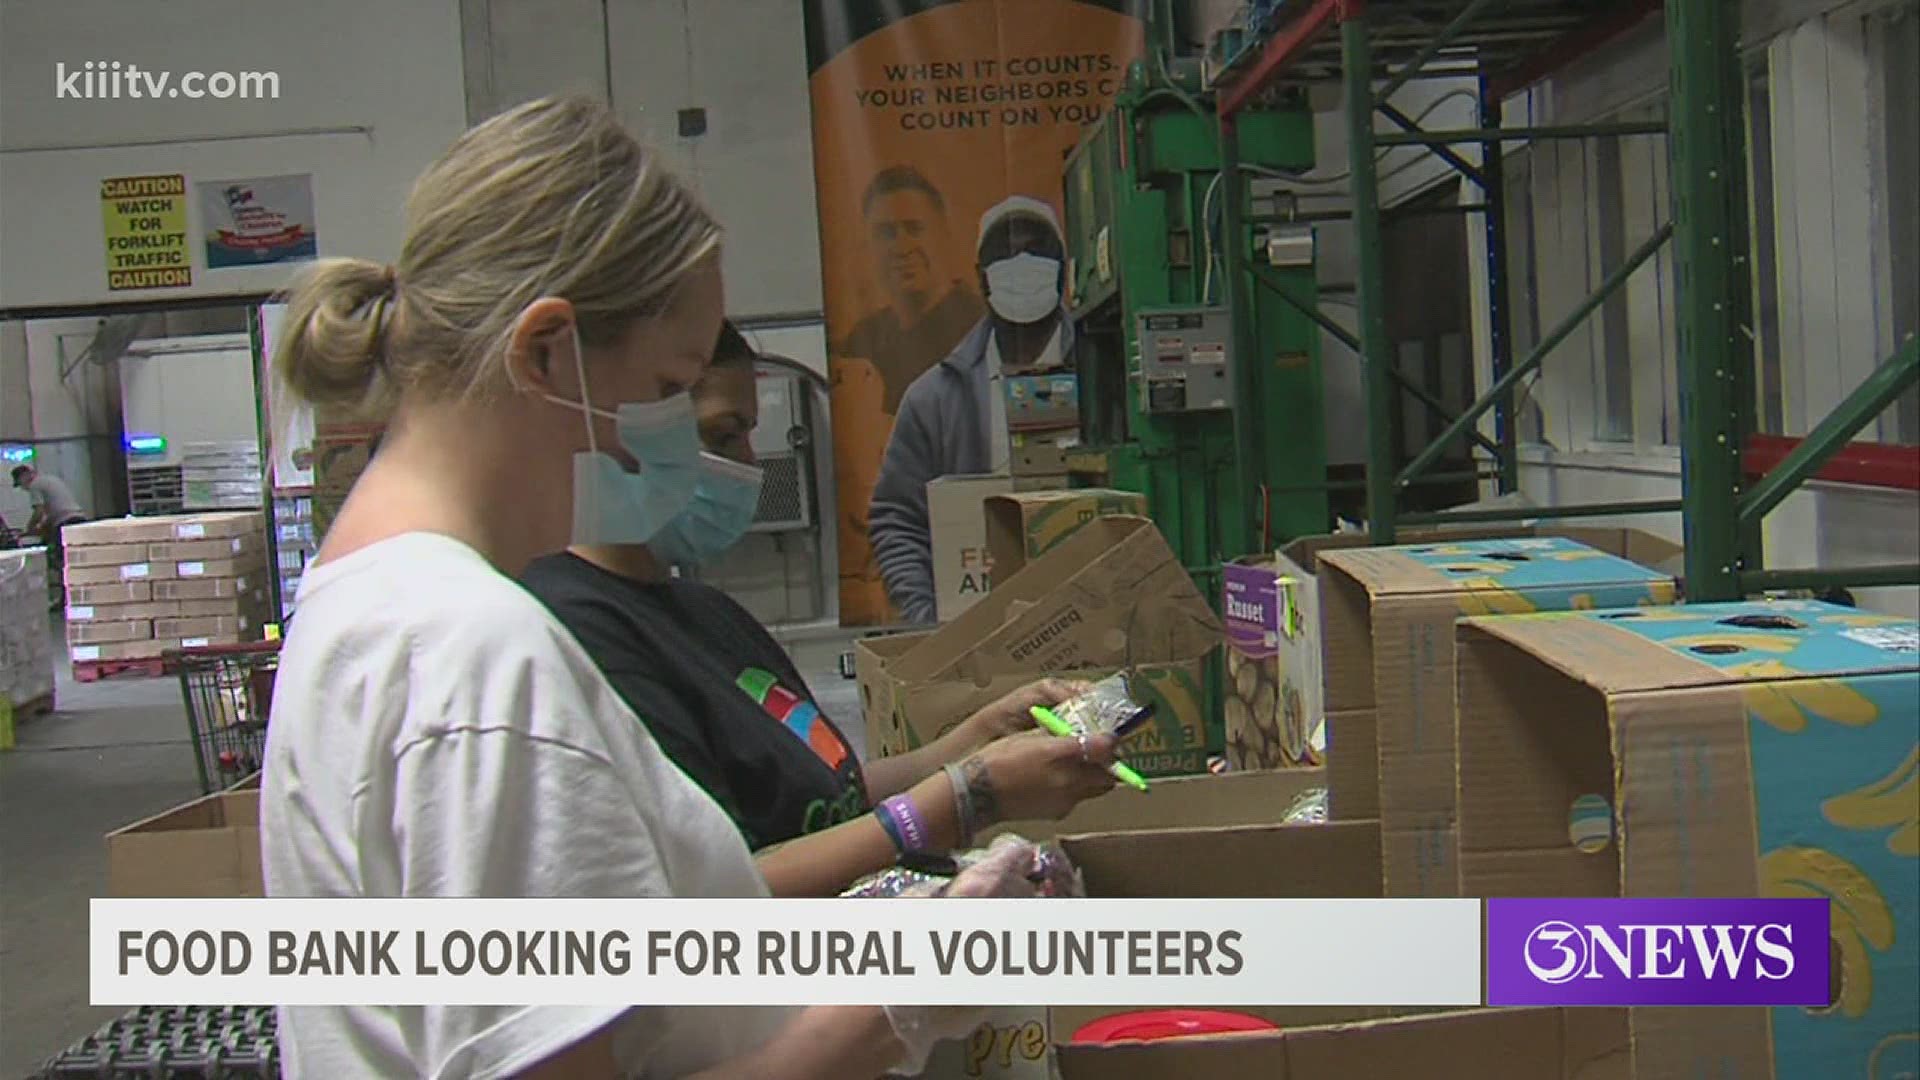 The Coastal Bend Food Bank is in need of volunteers for their mobile food distributions in rural areas.